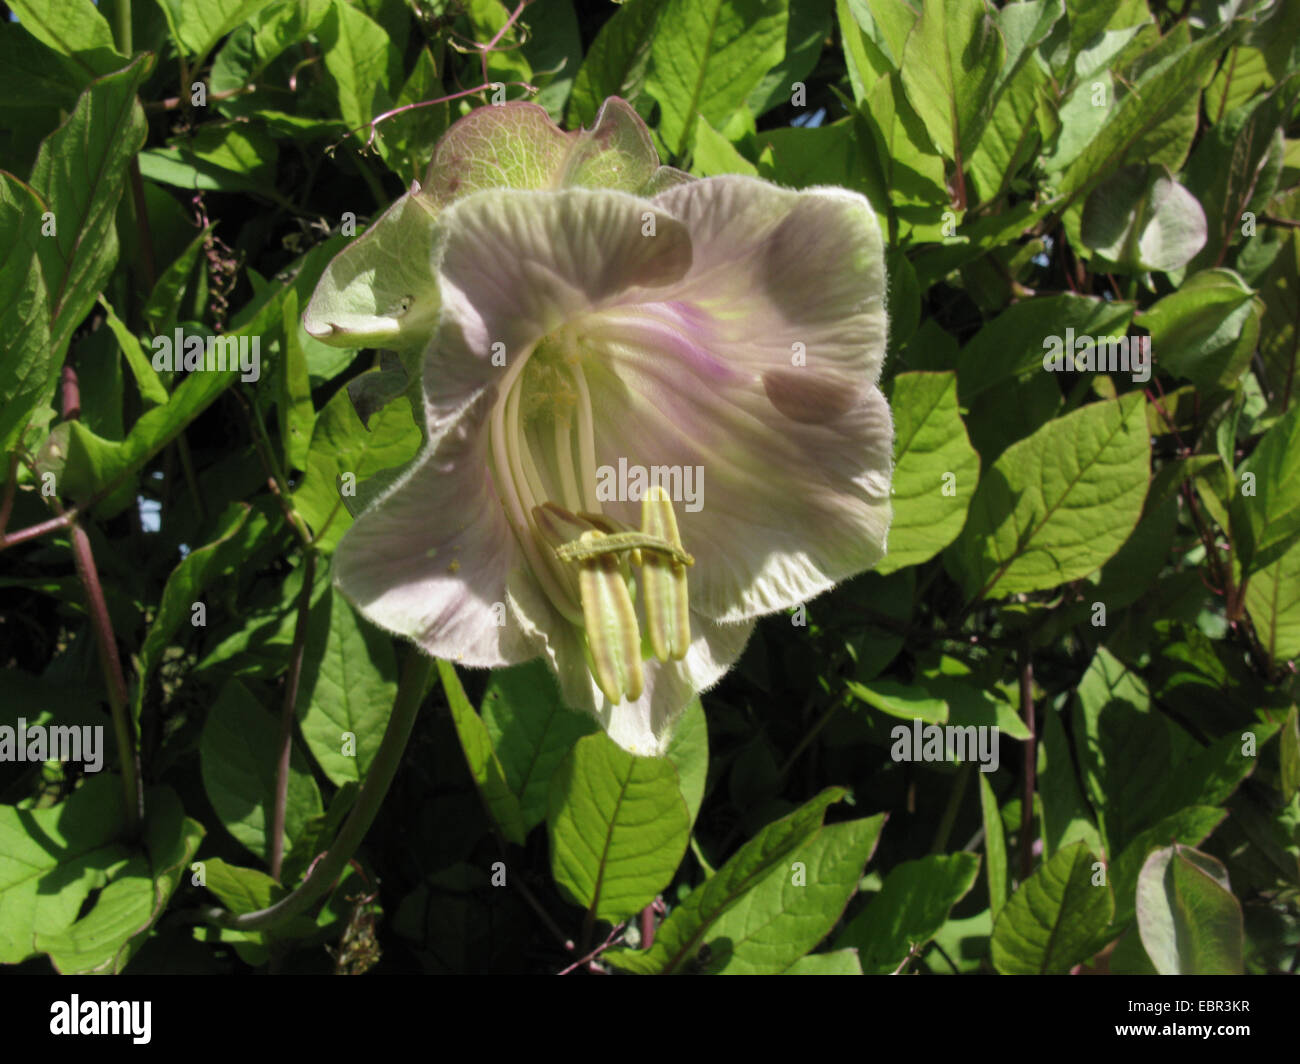 cup-and-saucer vine (Cobaea scandens), flower Stock Photo